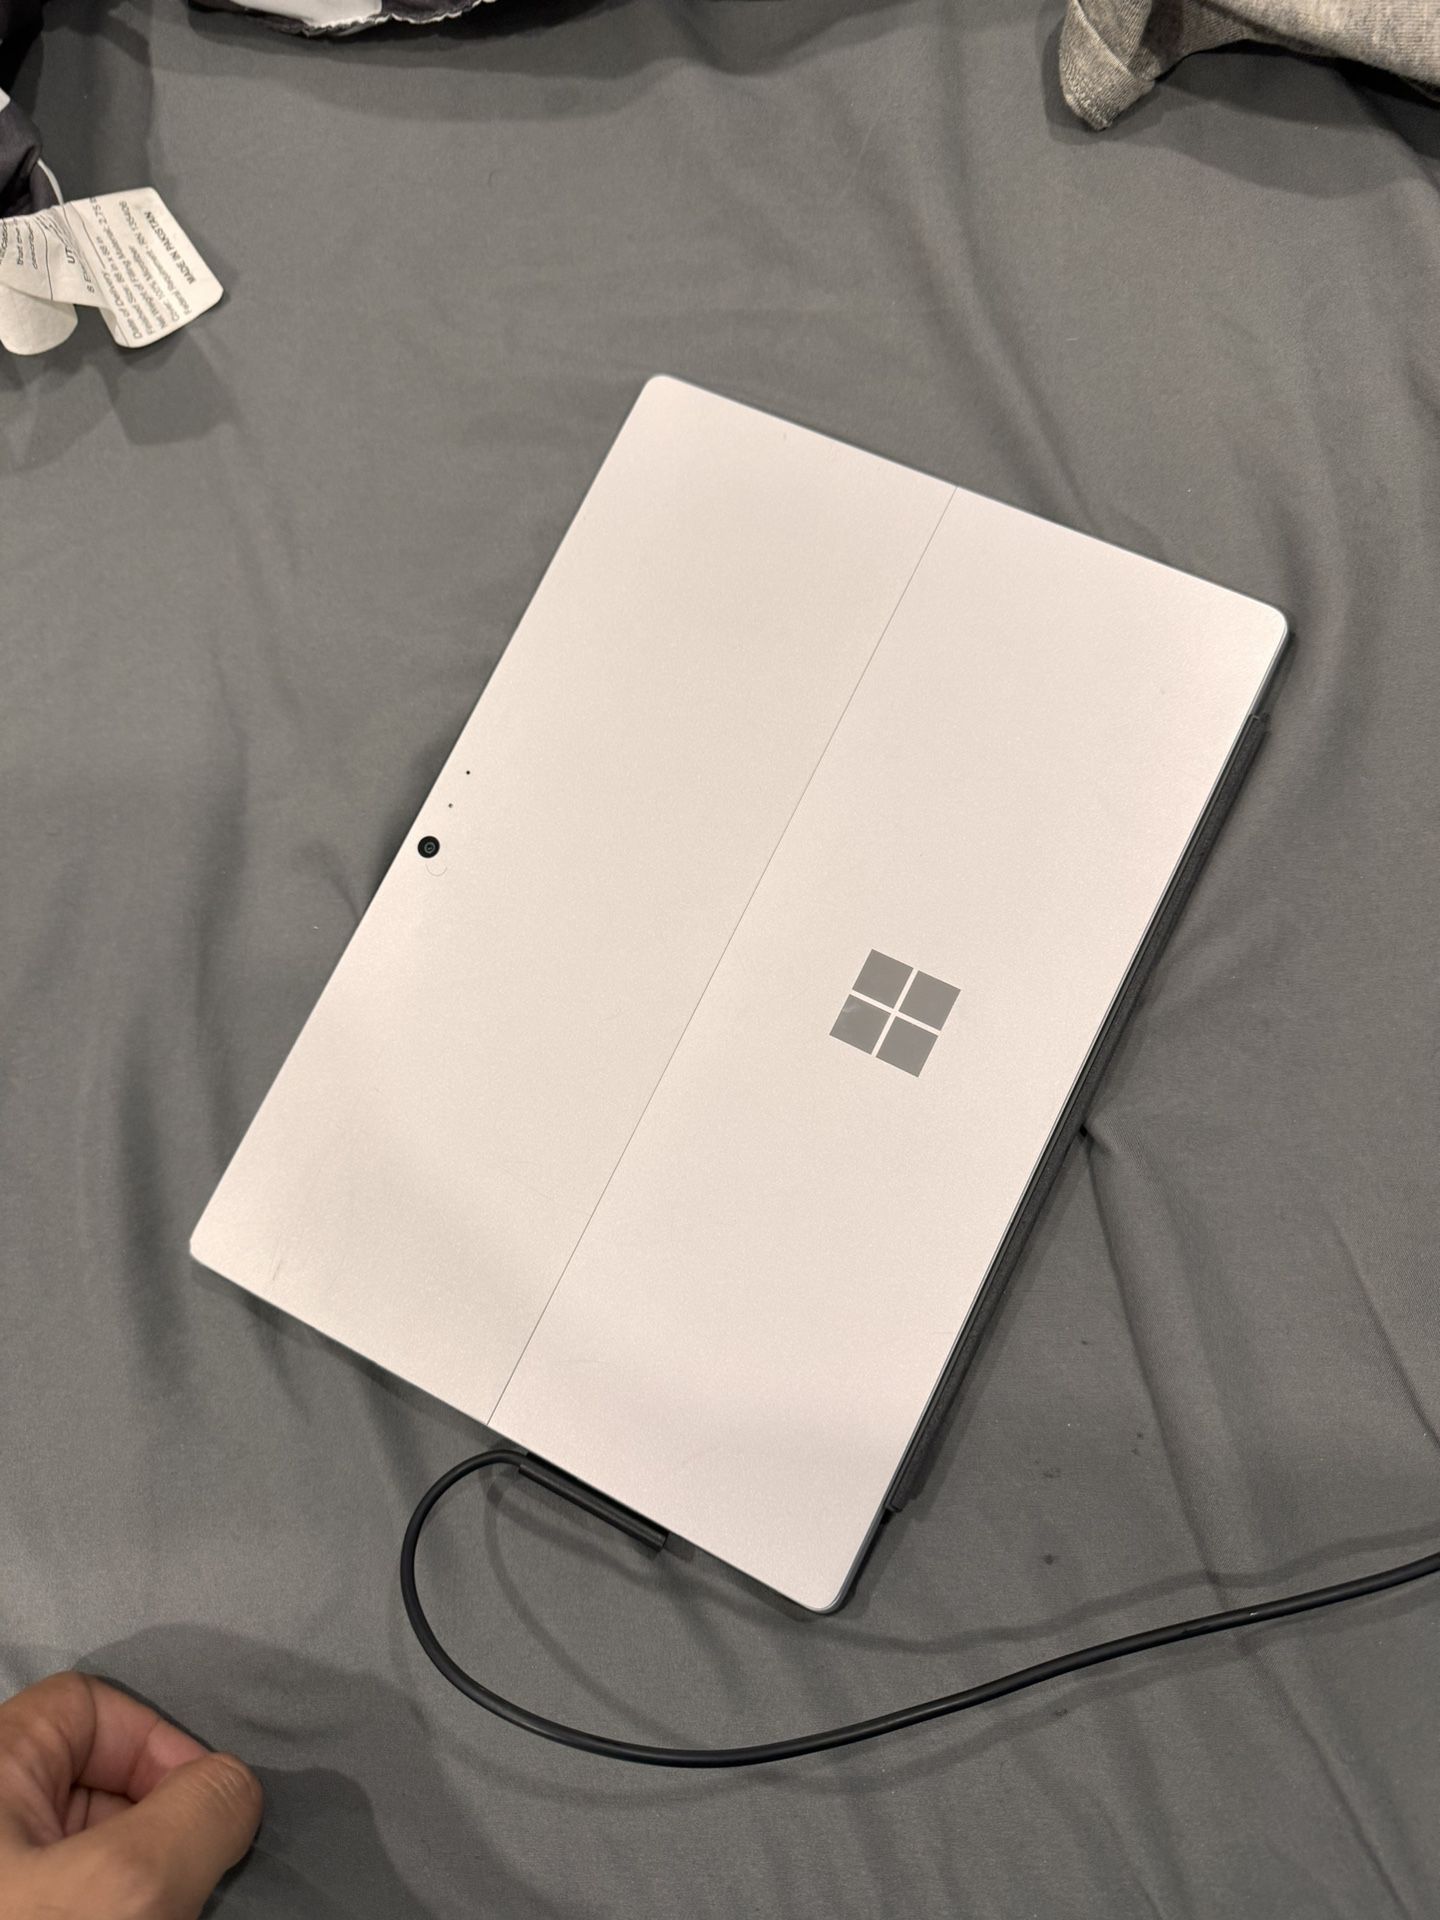 Microsoft Surface 4 With Keyboard